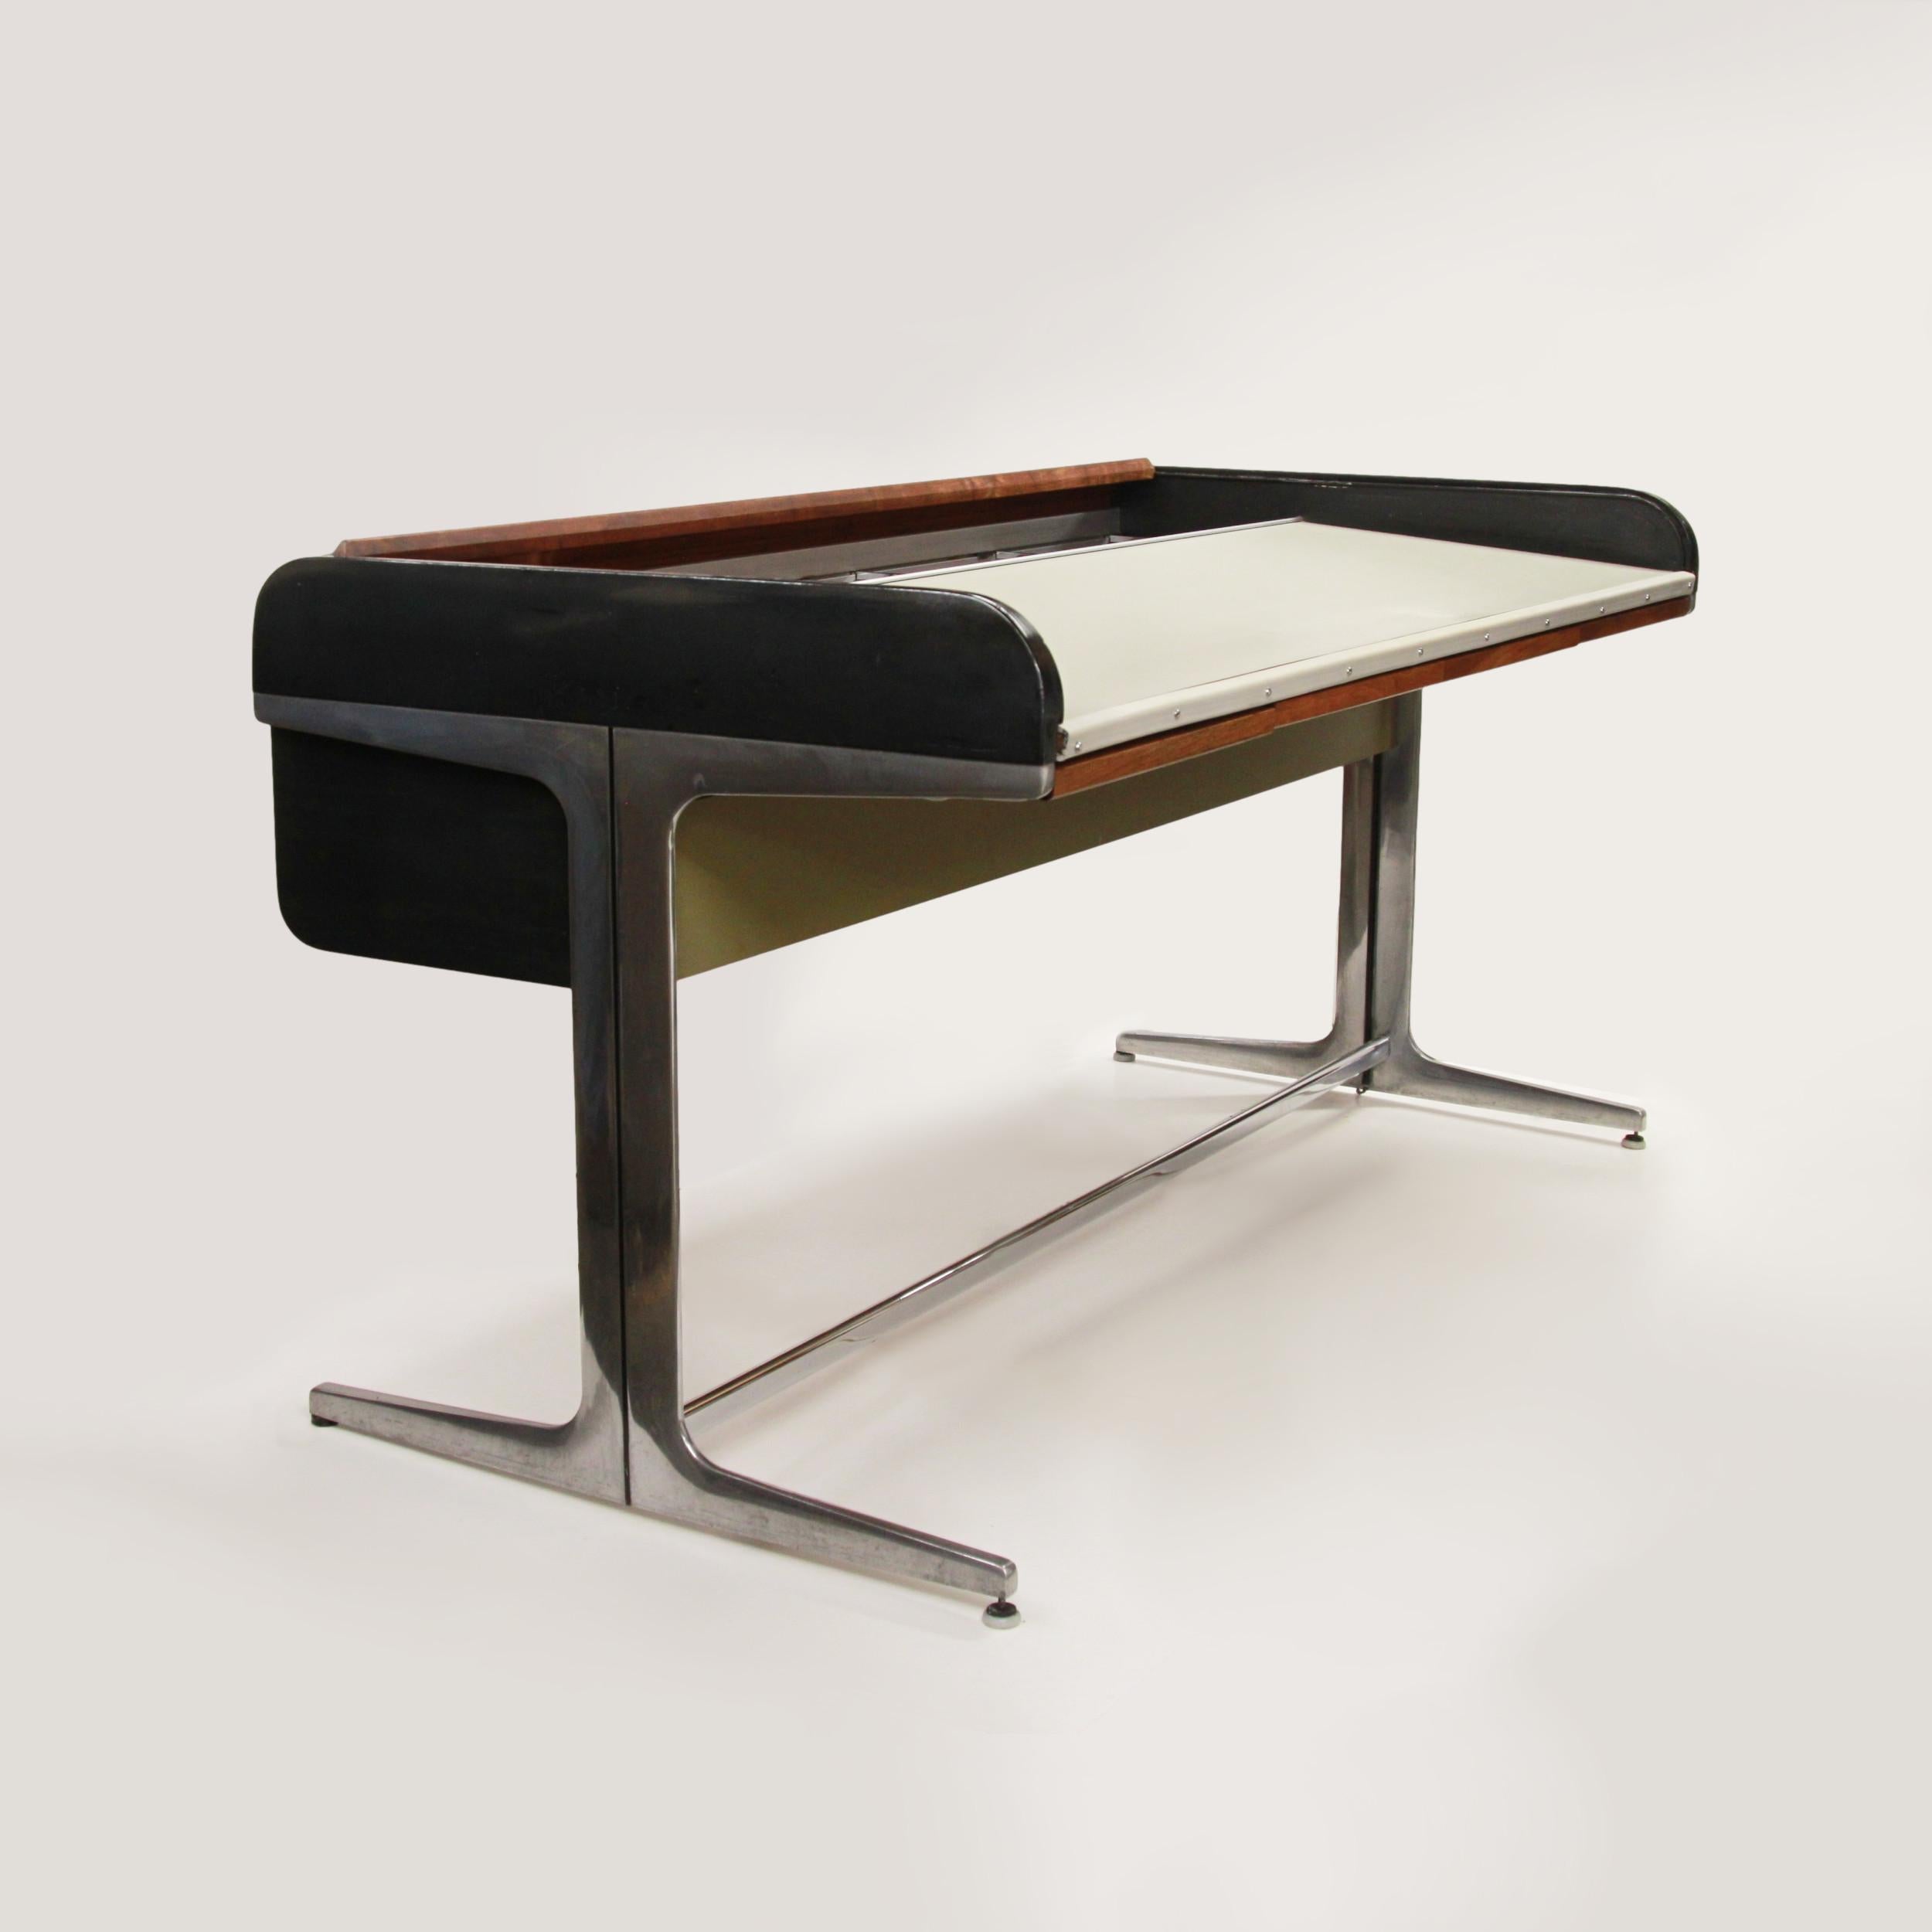 This is a wonderful early example of the Action Office Roll Top desk by George Nelson for Herman Miller.  

Desk features:
Walnut roll top
(4) action drawers
Ebonized black side panels
Deep inner file space
Cast aluminum frame
Foot rest
White